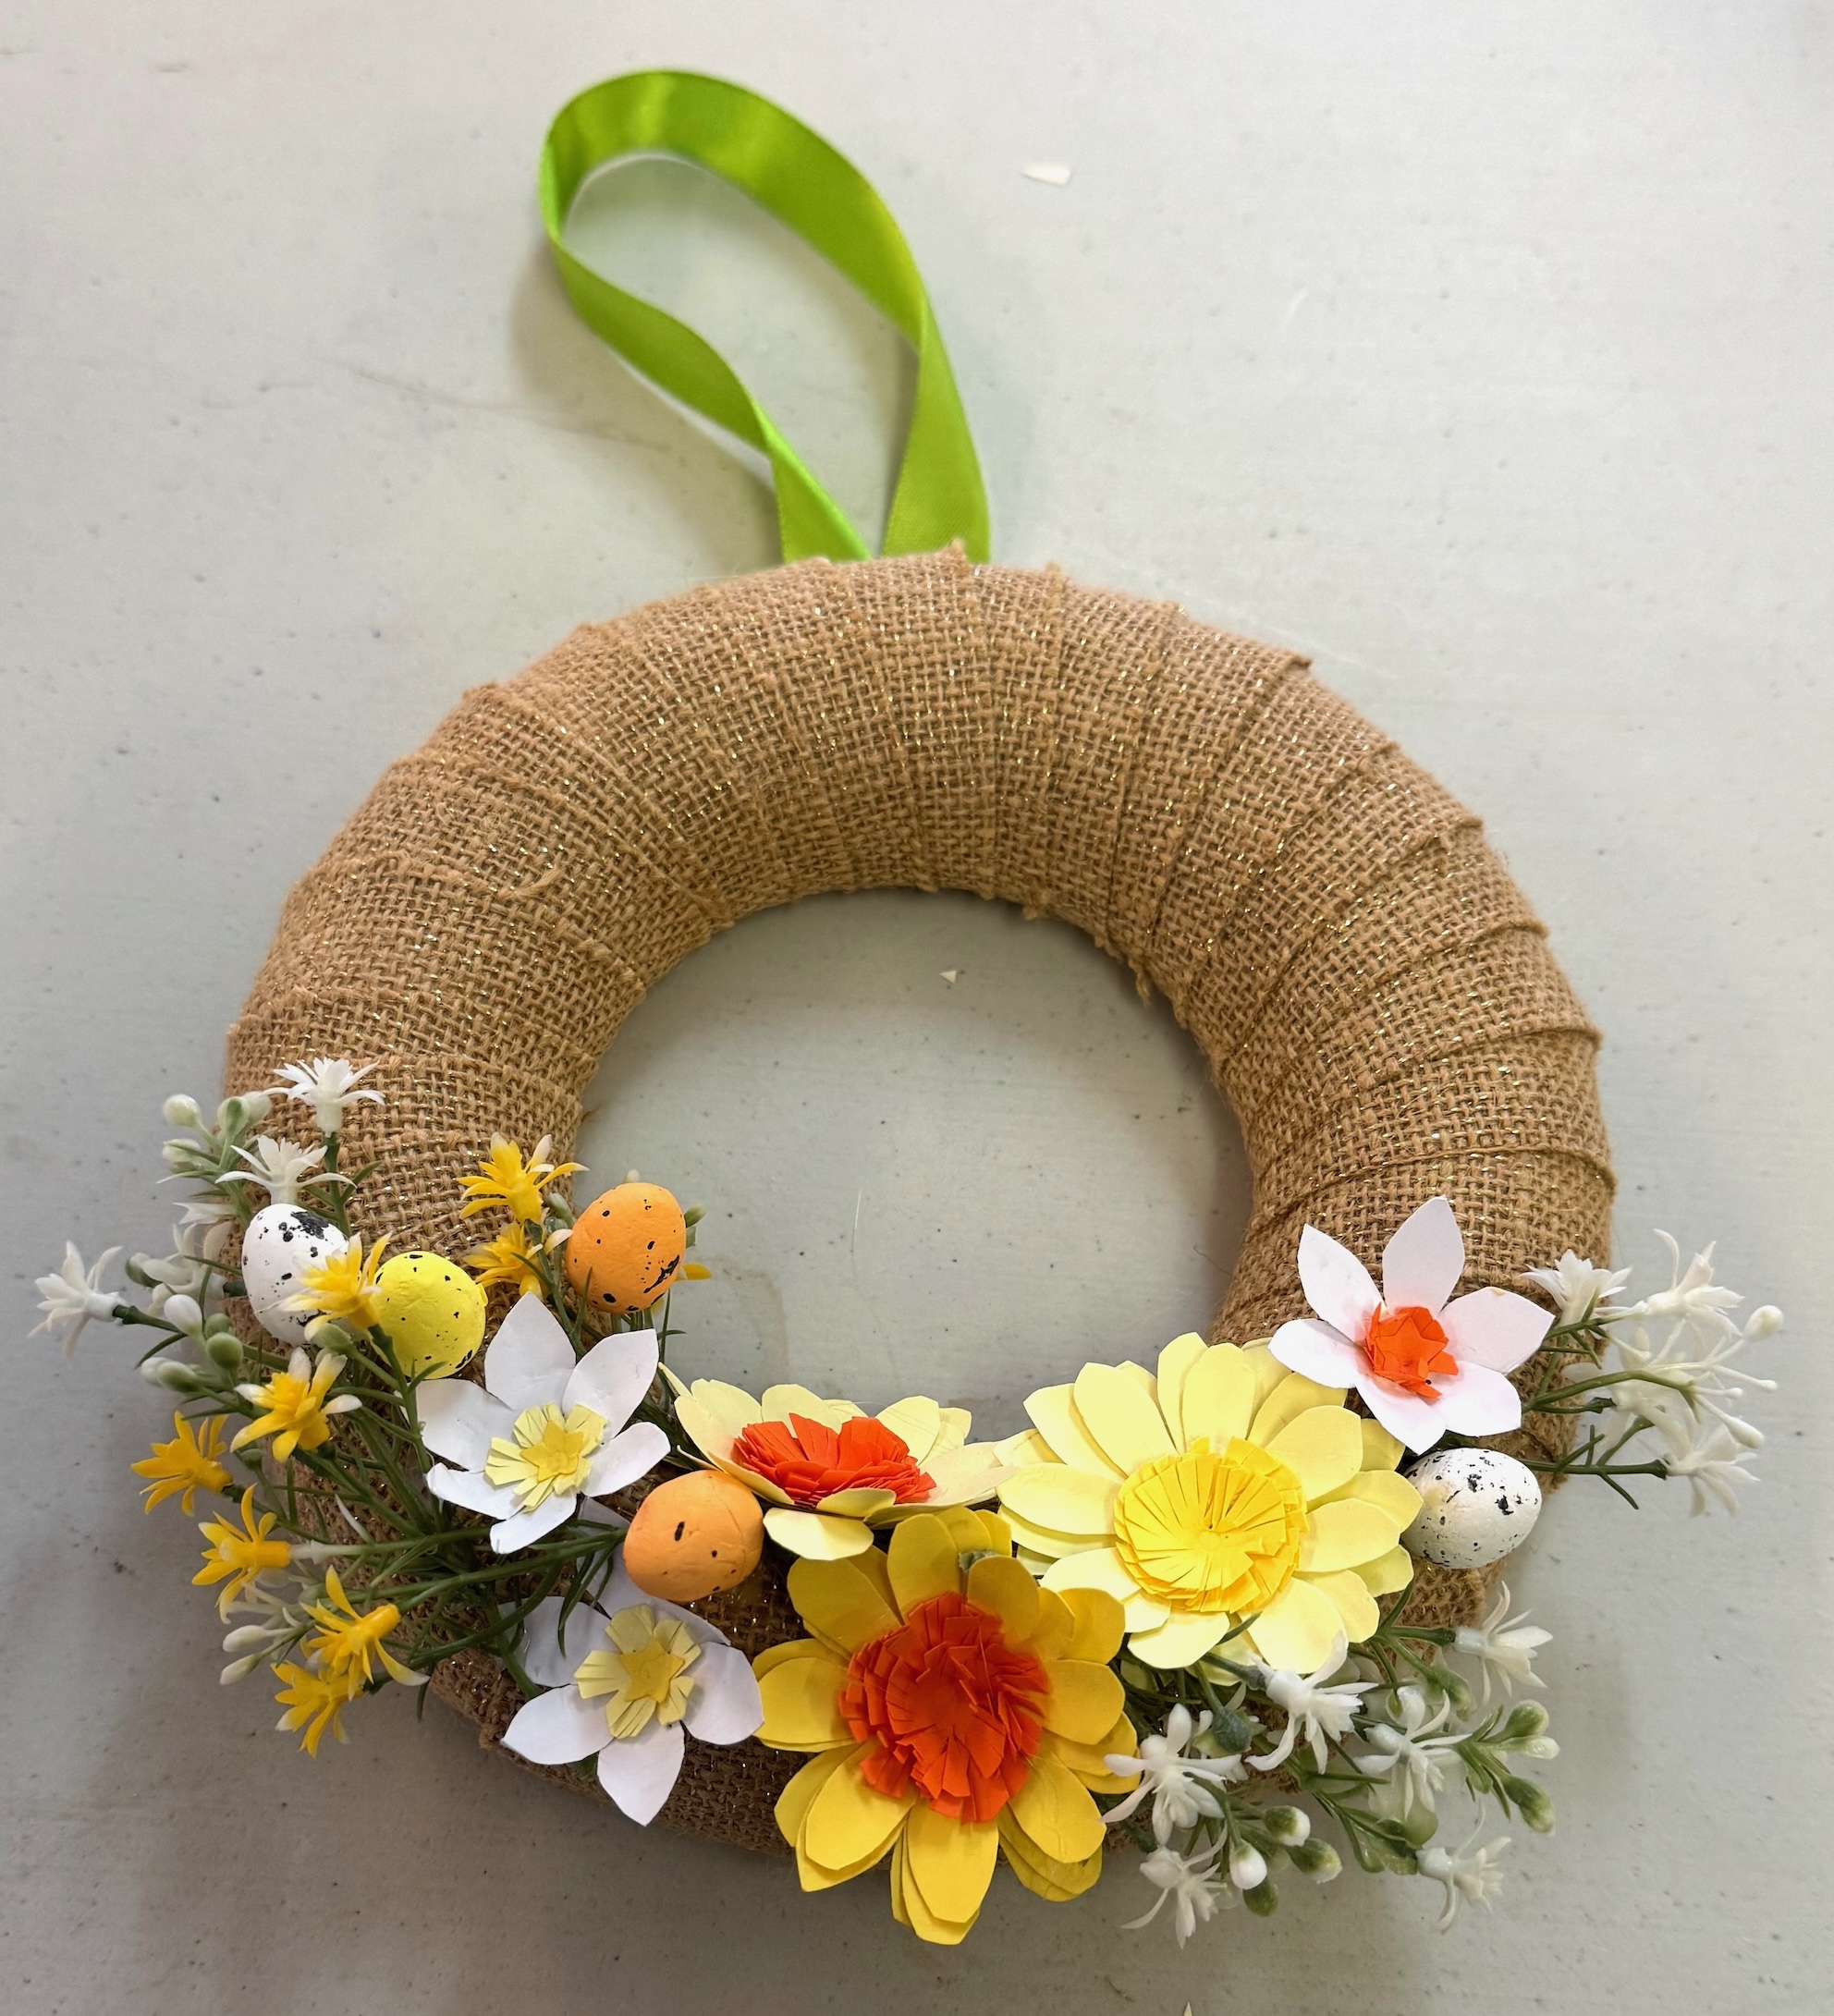 A completed wreath